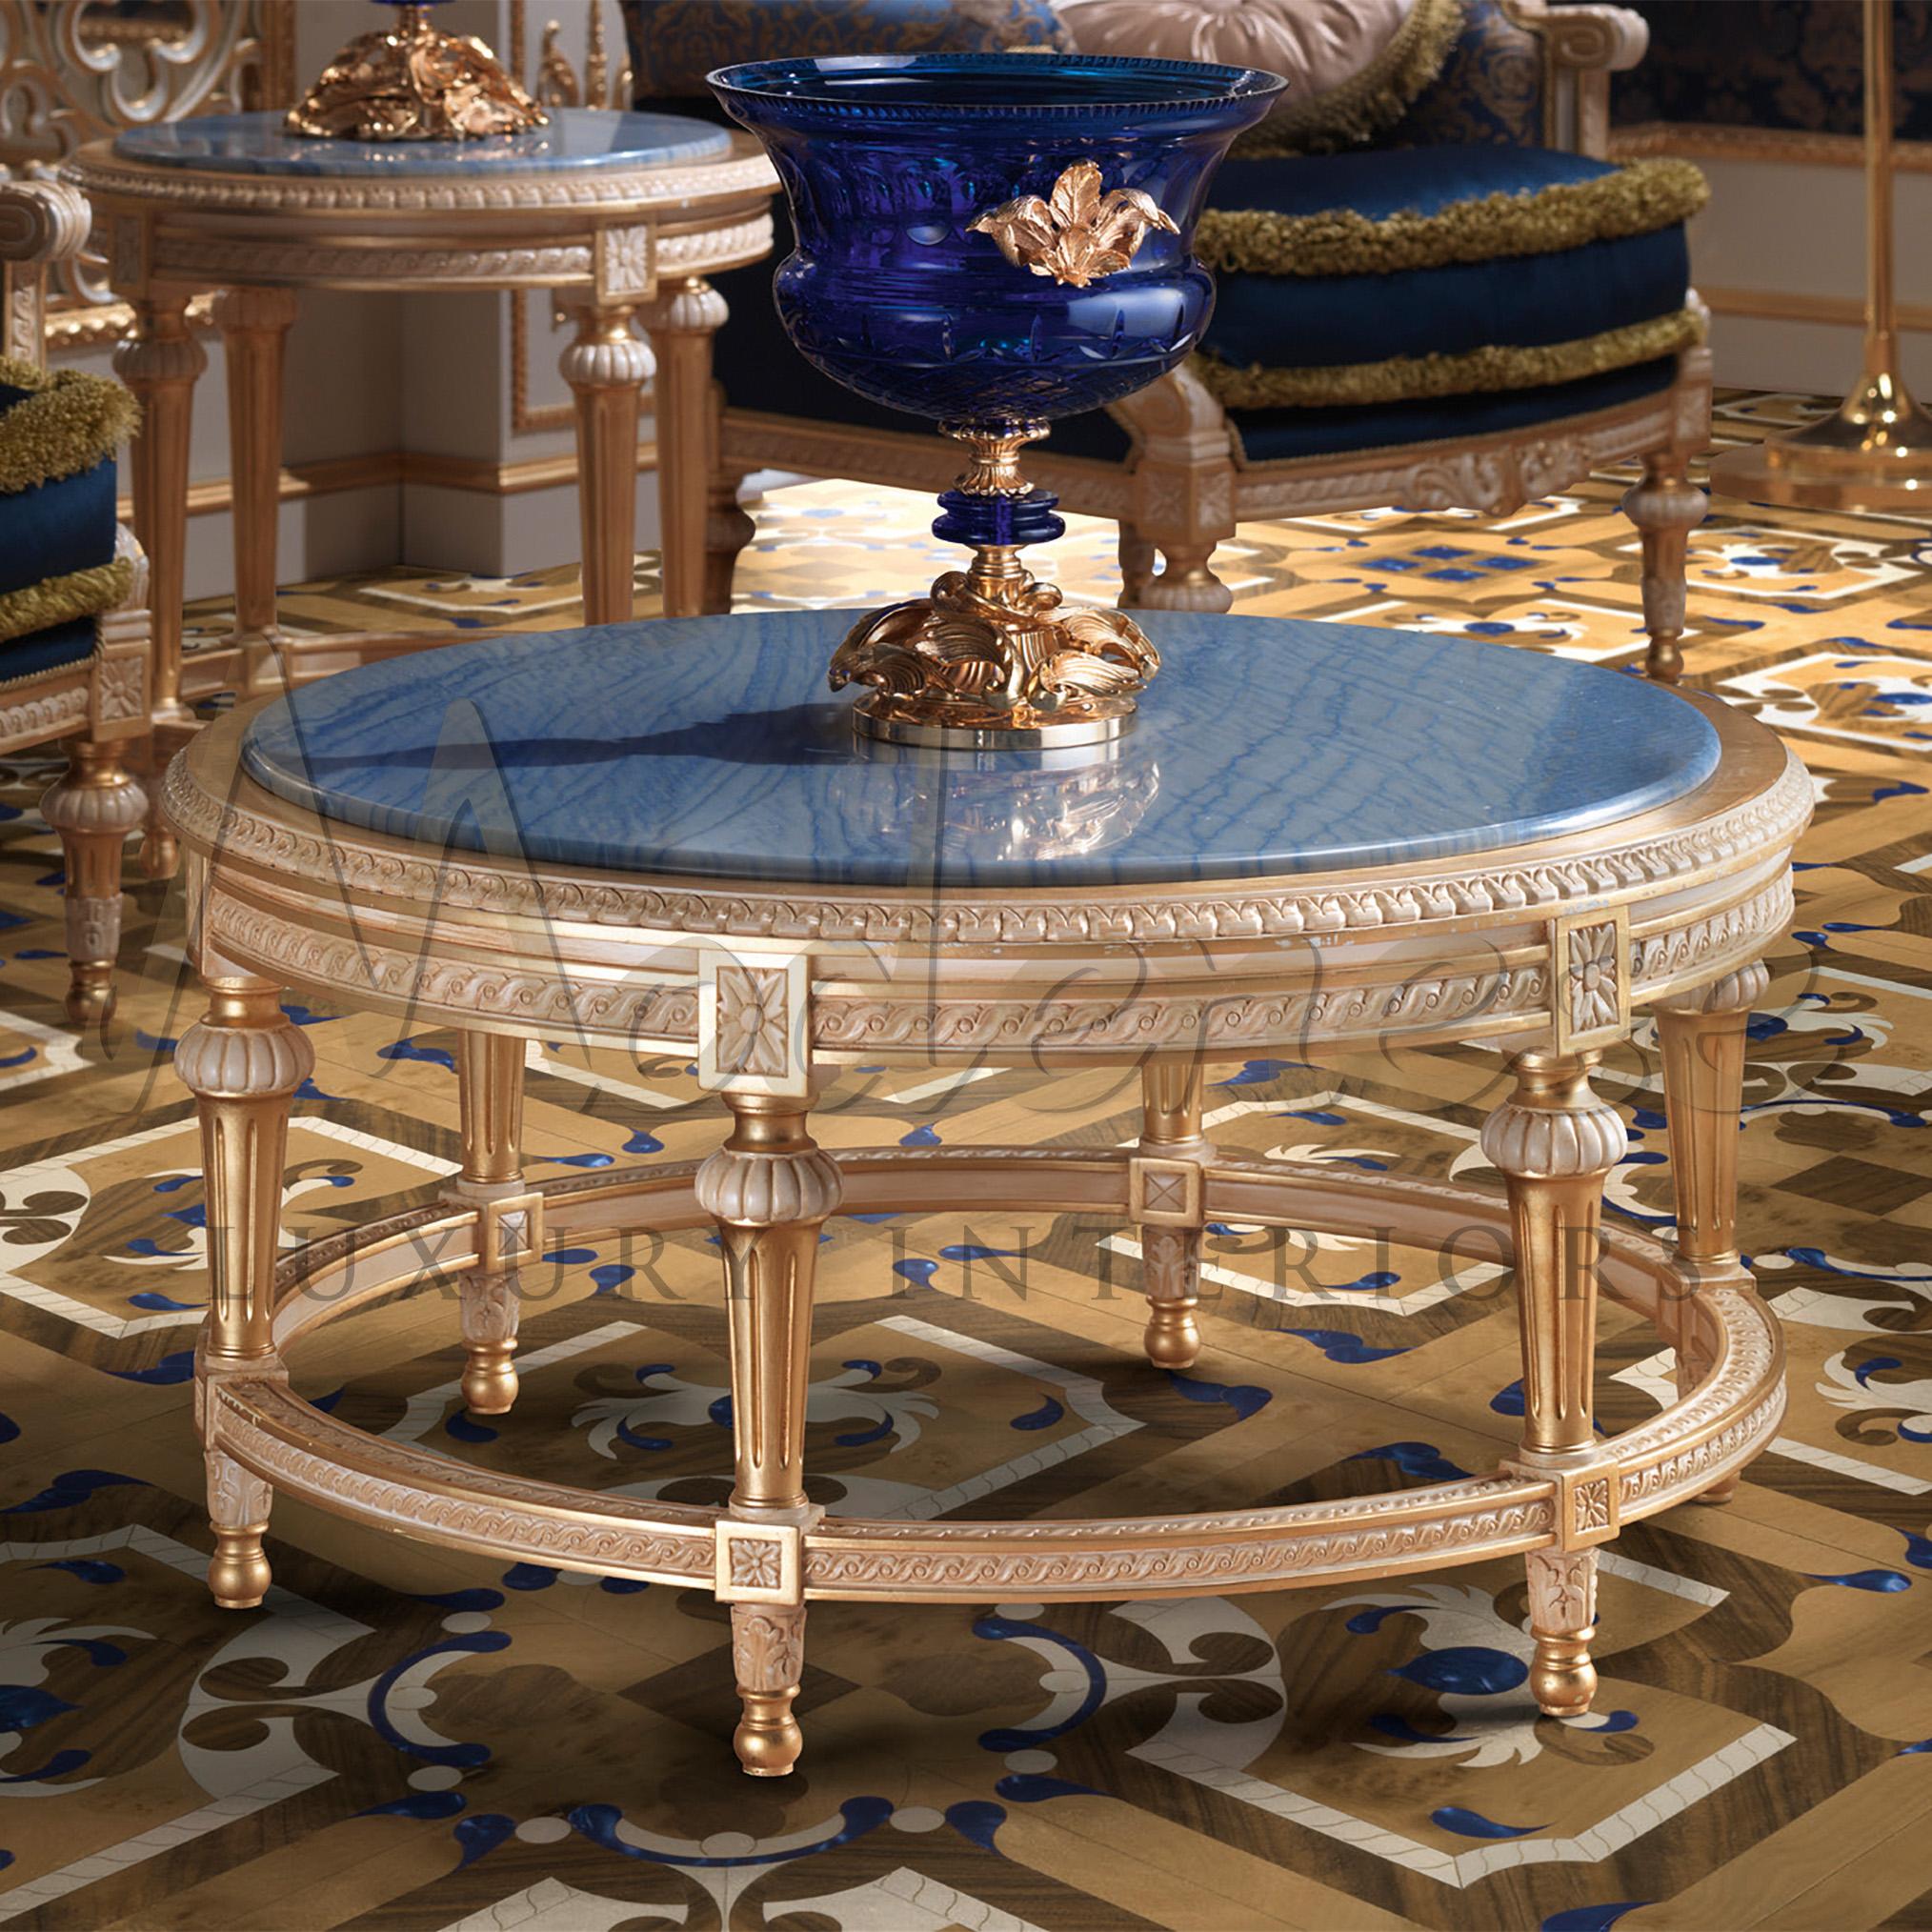 Modenese artisans kwoledge of gold leaf applications goes beyond imagination. The true essence of their work is shown through this magnificent round coffee table, that catches the eye with its tasteful combination of azul marble and shining gold